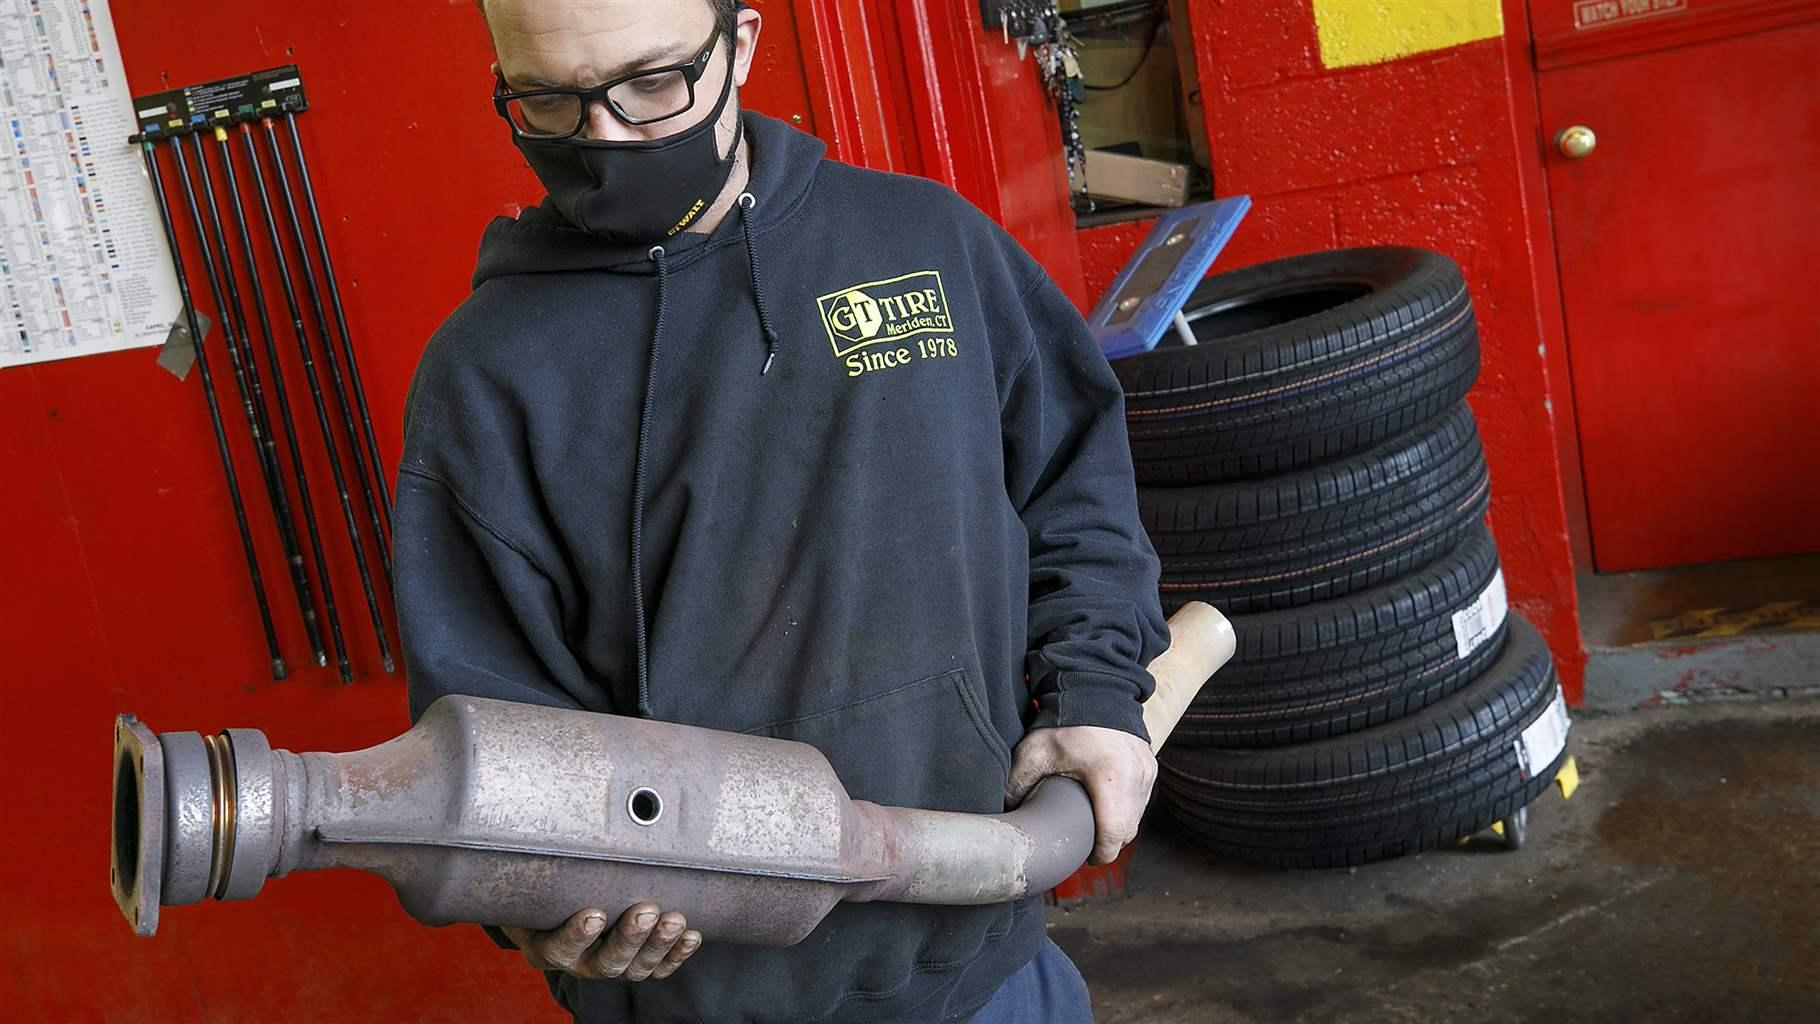 Ari Thielman, manager at GT Tire & Service Center in Meridien, Conn., holds a catalytic converter from a Ford F-150 that the business replaced for a customer. Catalytic converter theft has skyrocketed in the past few years, and legislatures are trying to address the problem